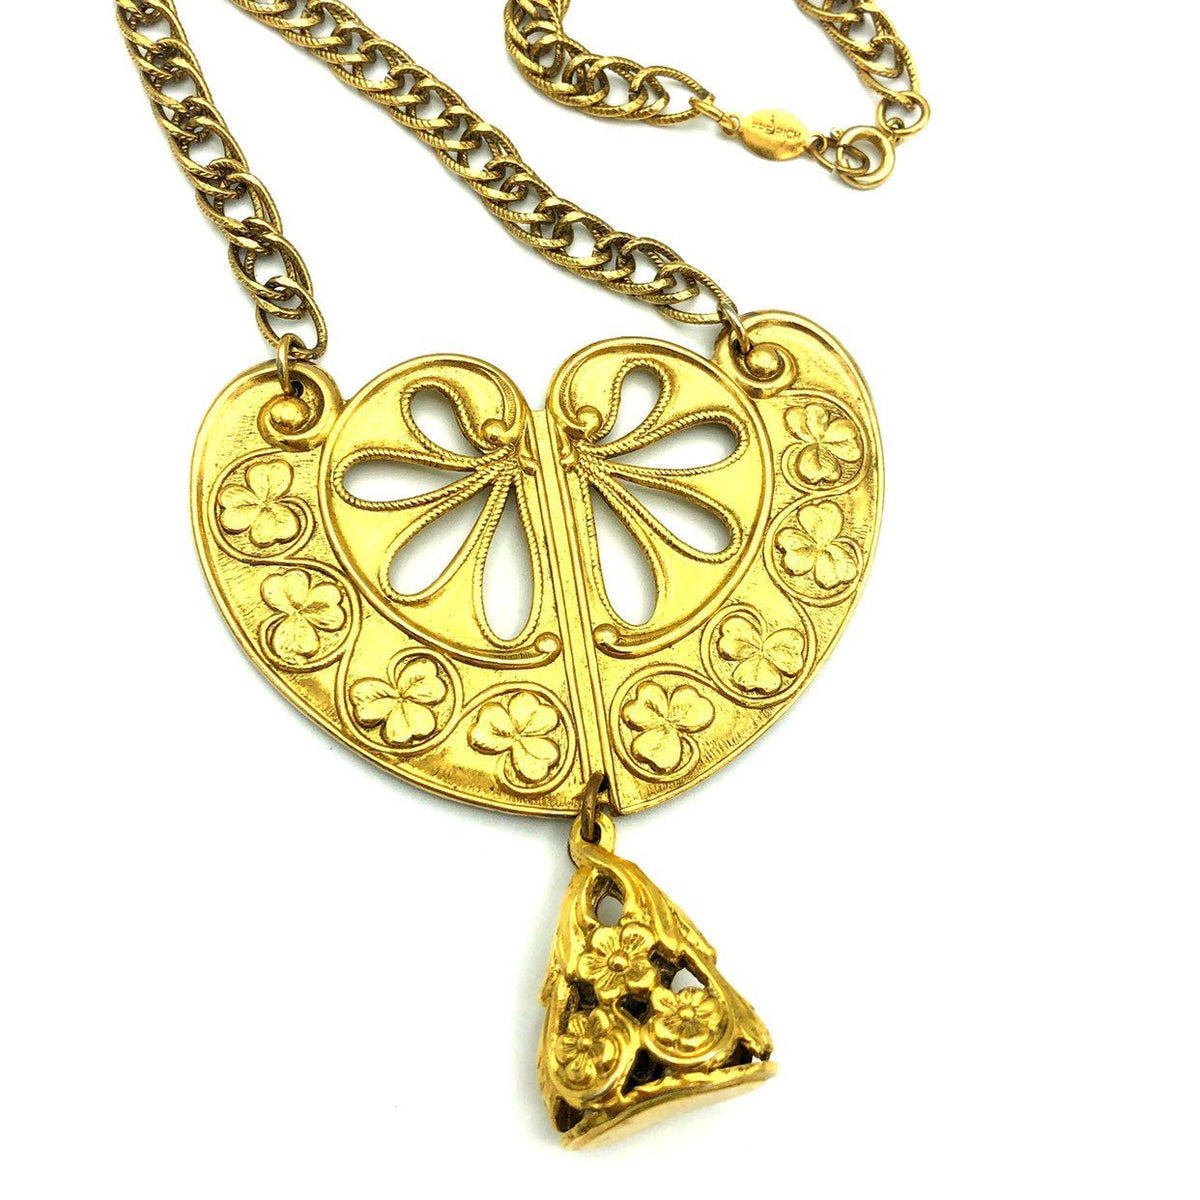 Freirich Gold Large Victorian Revival Pendant - 24 Wishes Vintage Jewelry